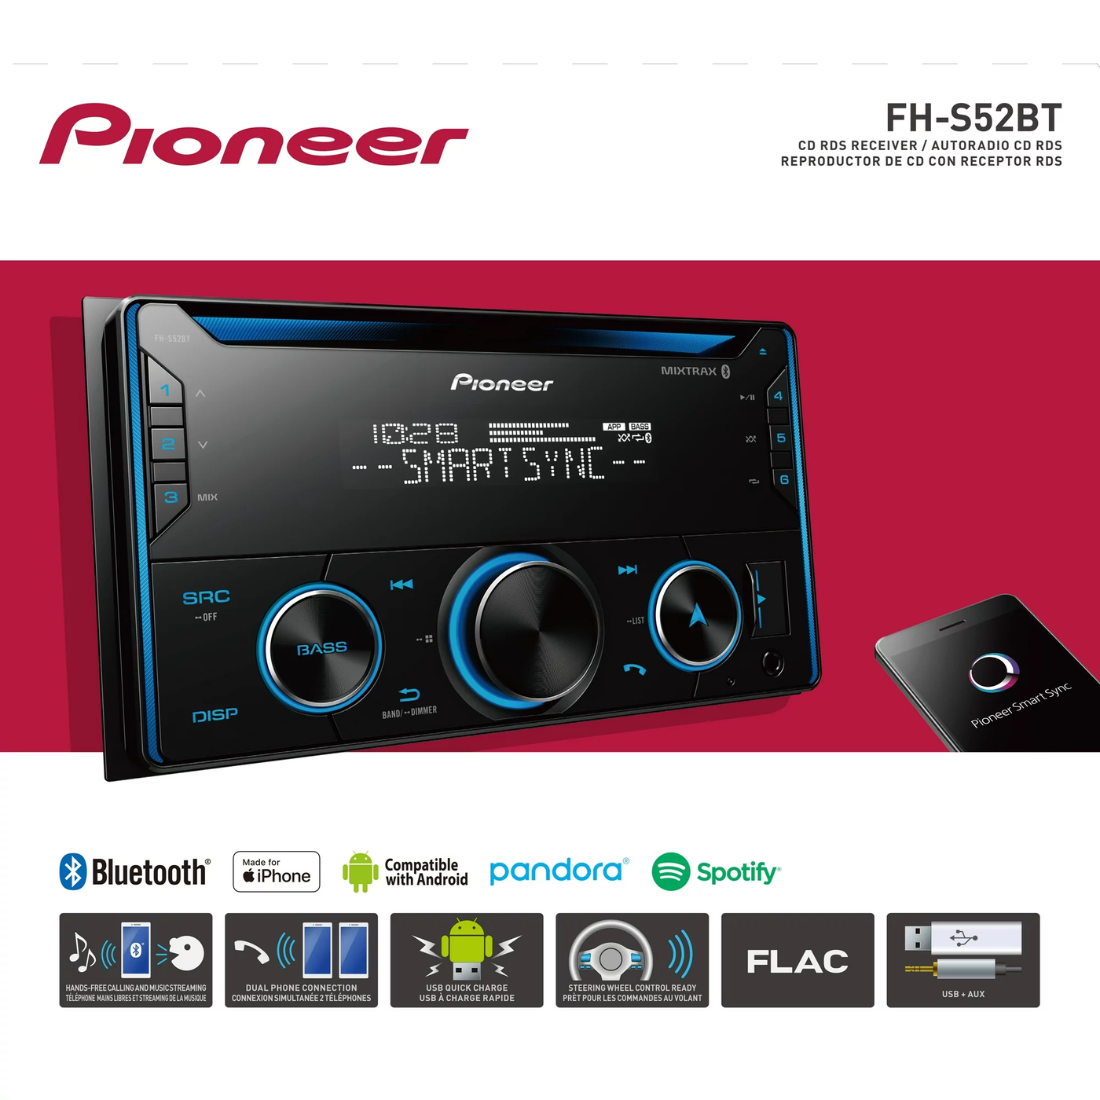 Pioneer FH-S52BT 2-DIN In-Dash CD Bluetooth Receiver Android iPhone Smart Sync